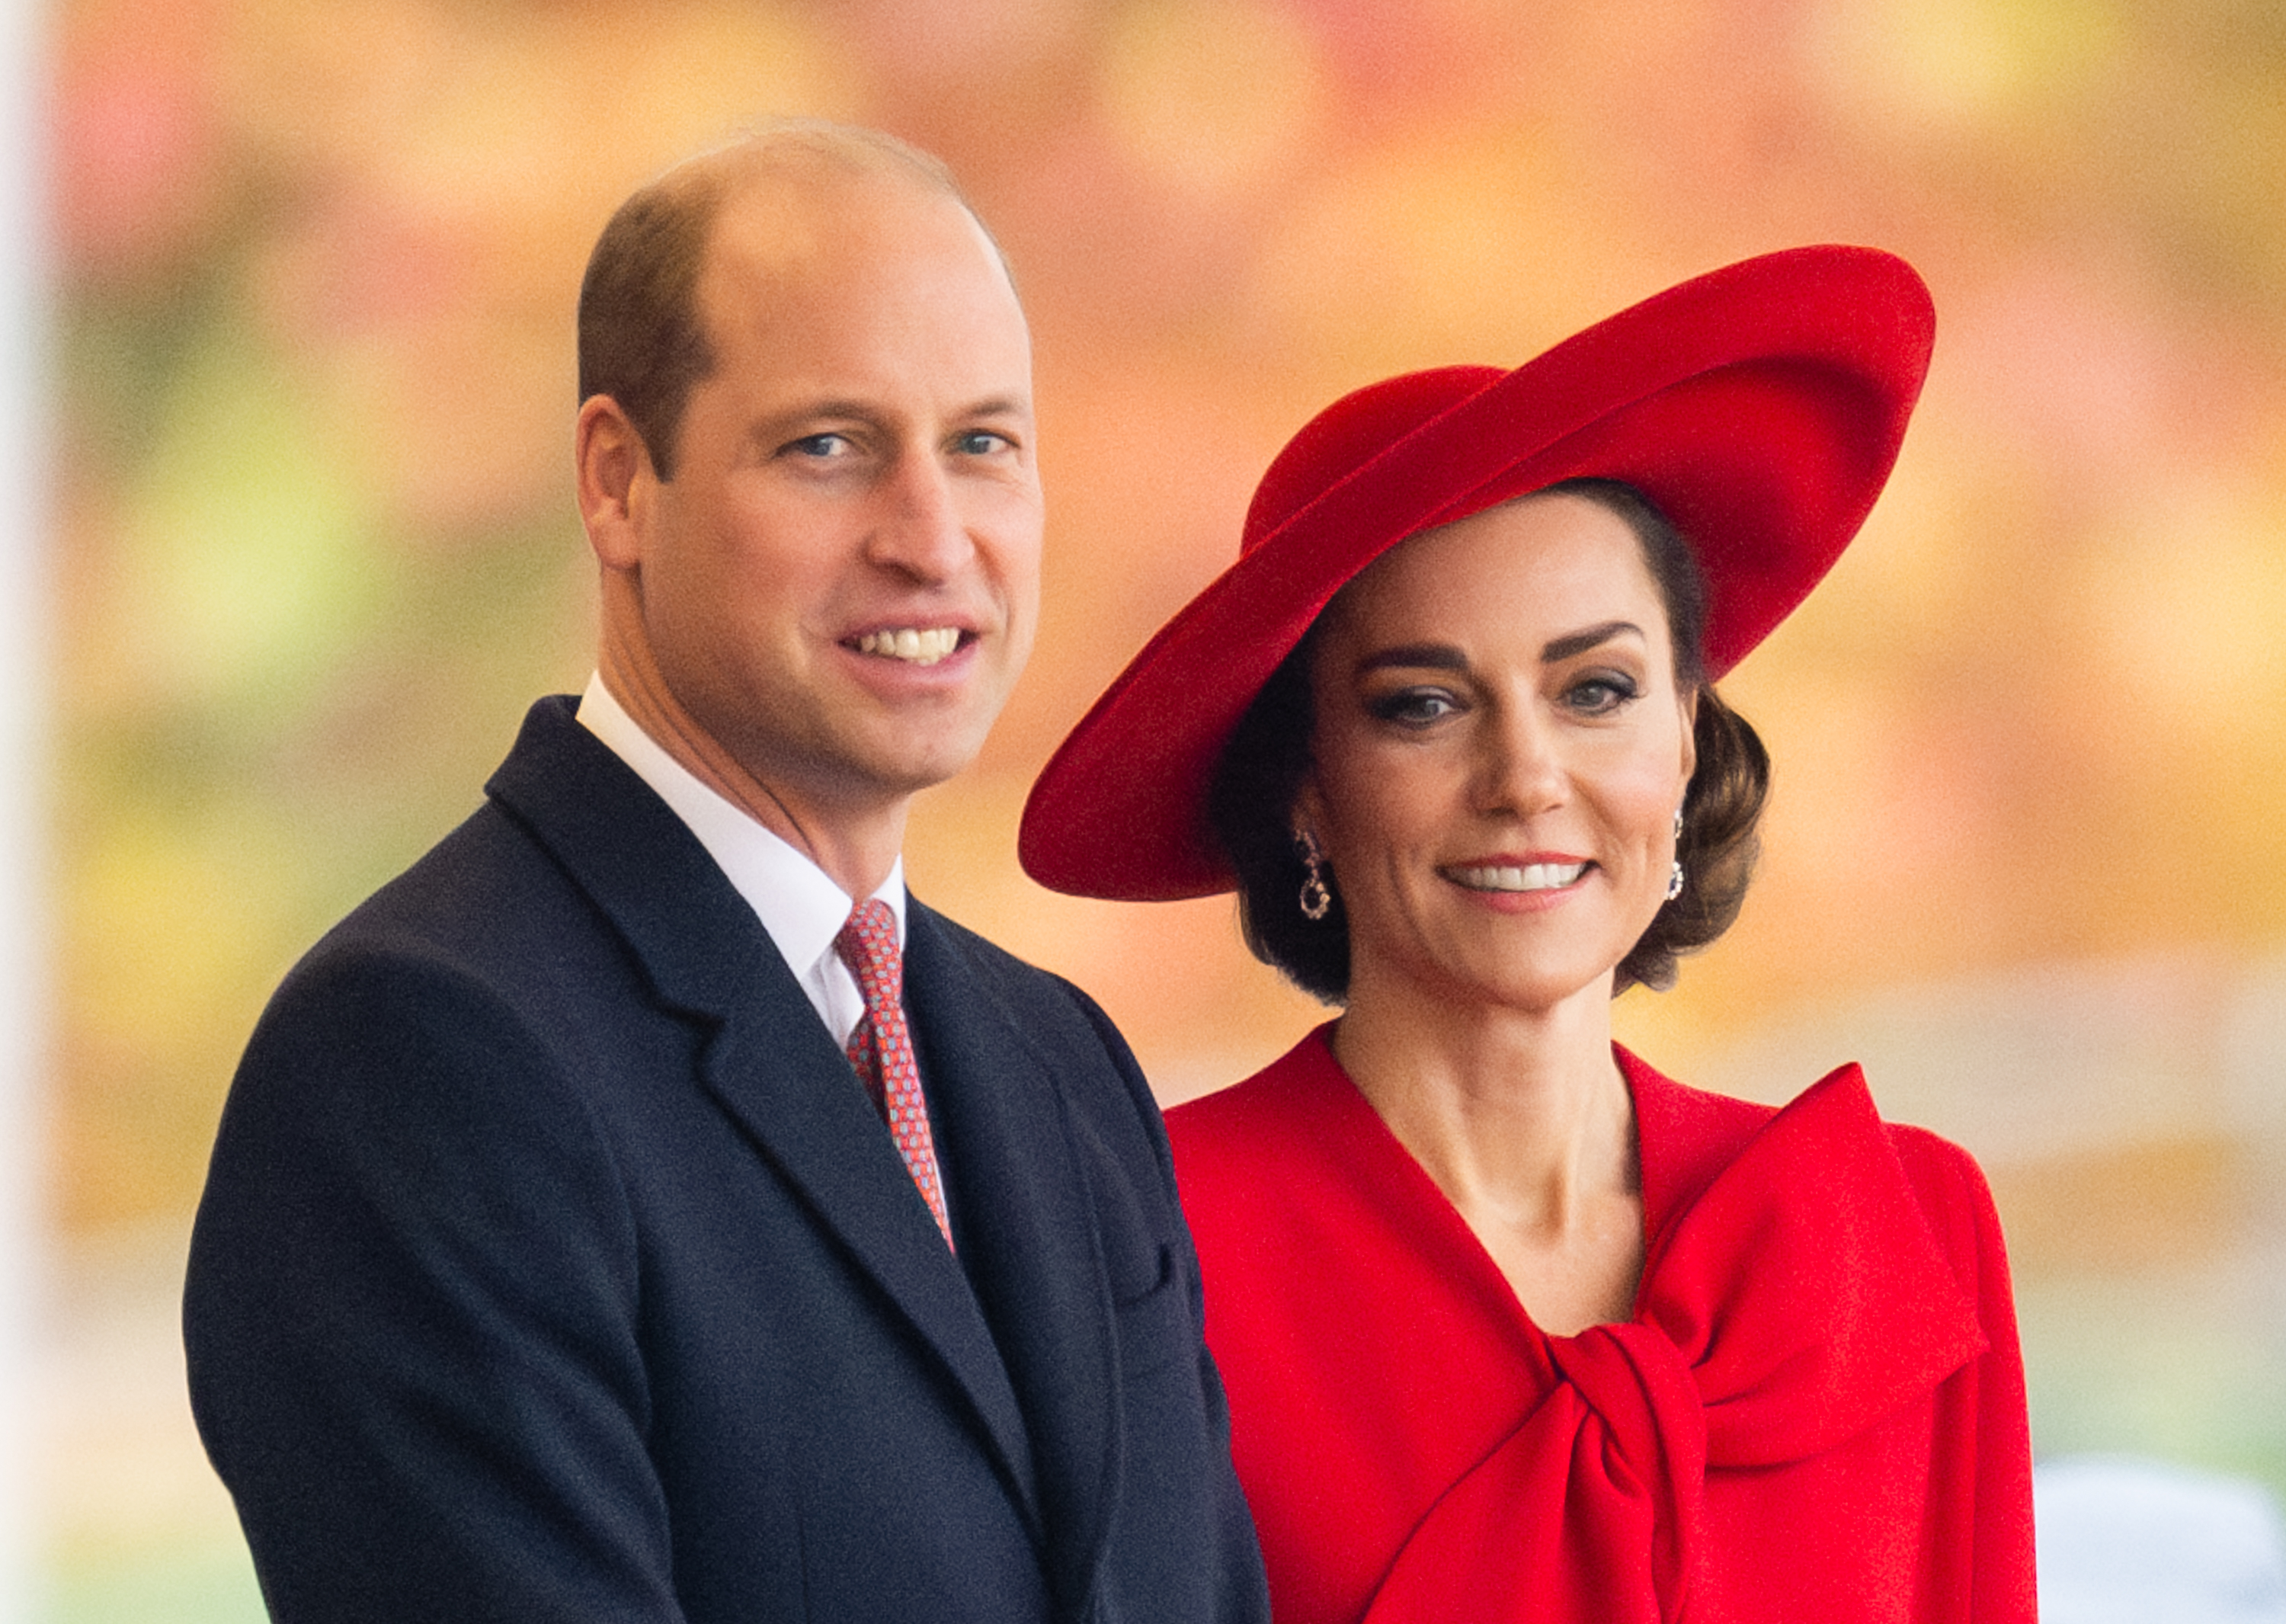 William in a navy suit and tie, Kate wearing a red hat and coat